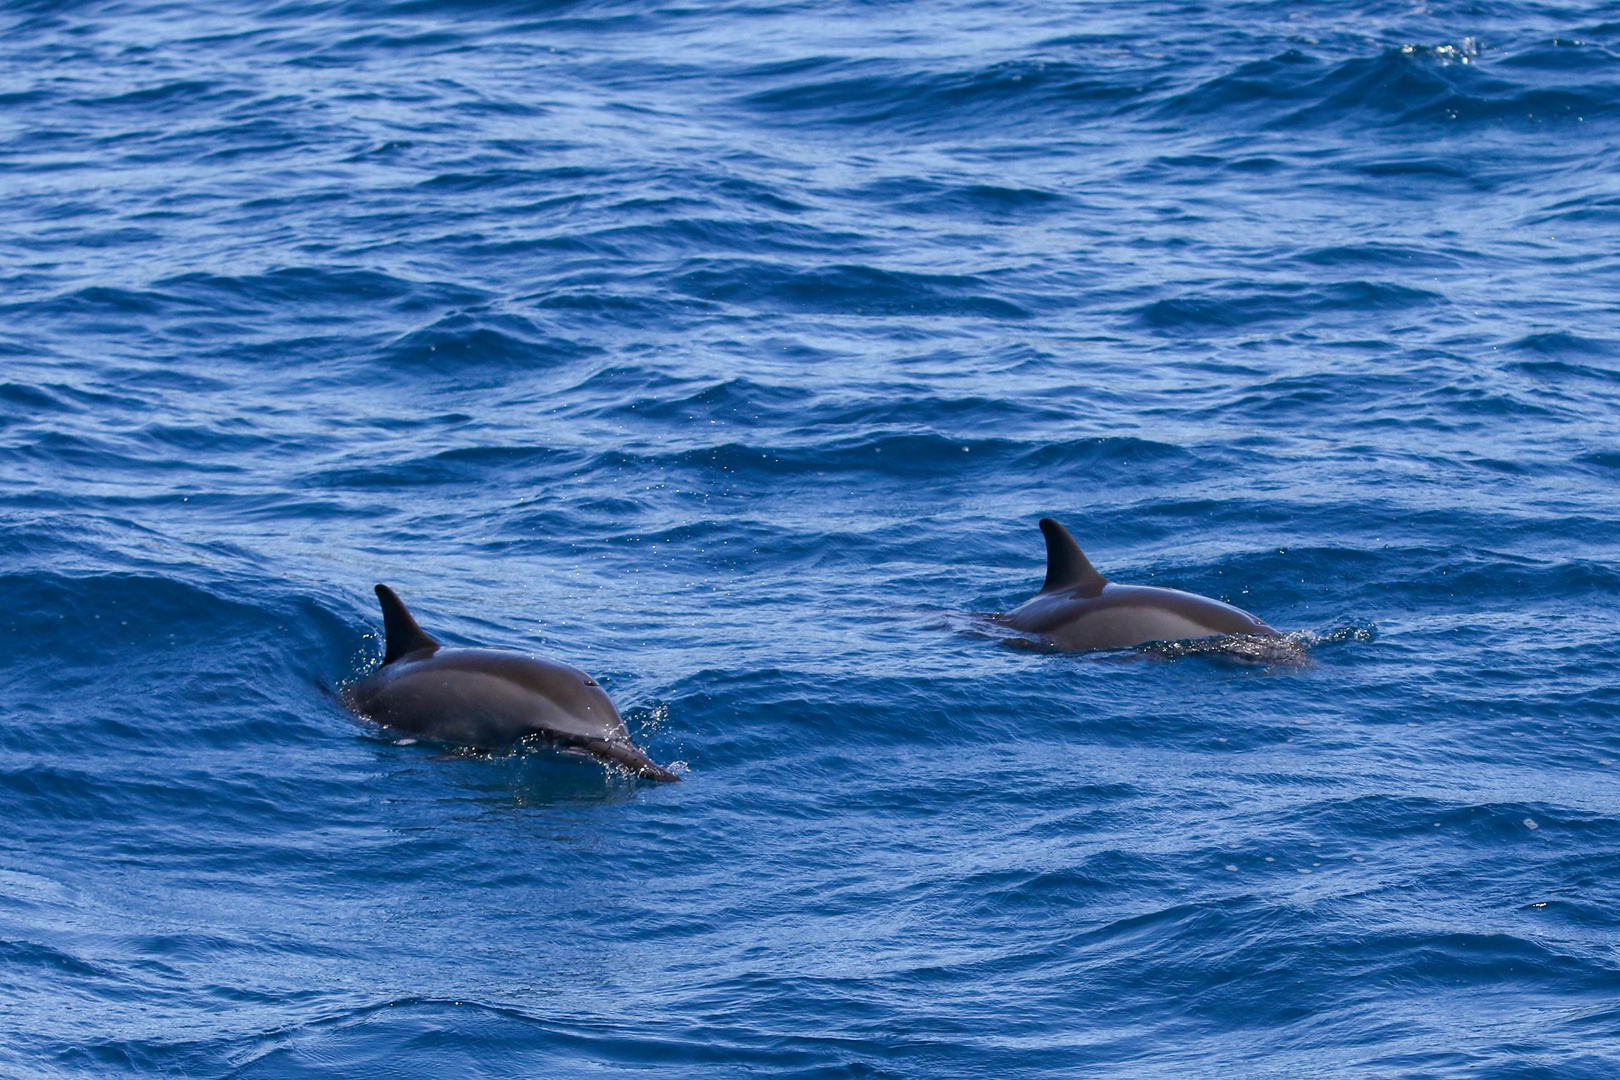 Kamuela Vacation Rentals, Palm Villas E1 - Dolphins Sometimes Frequent the Area